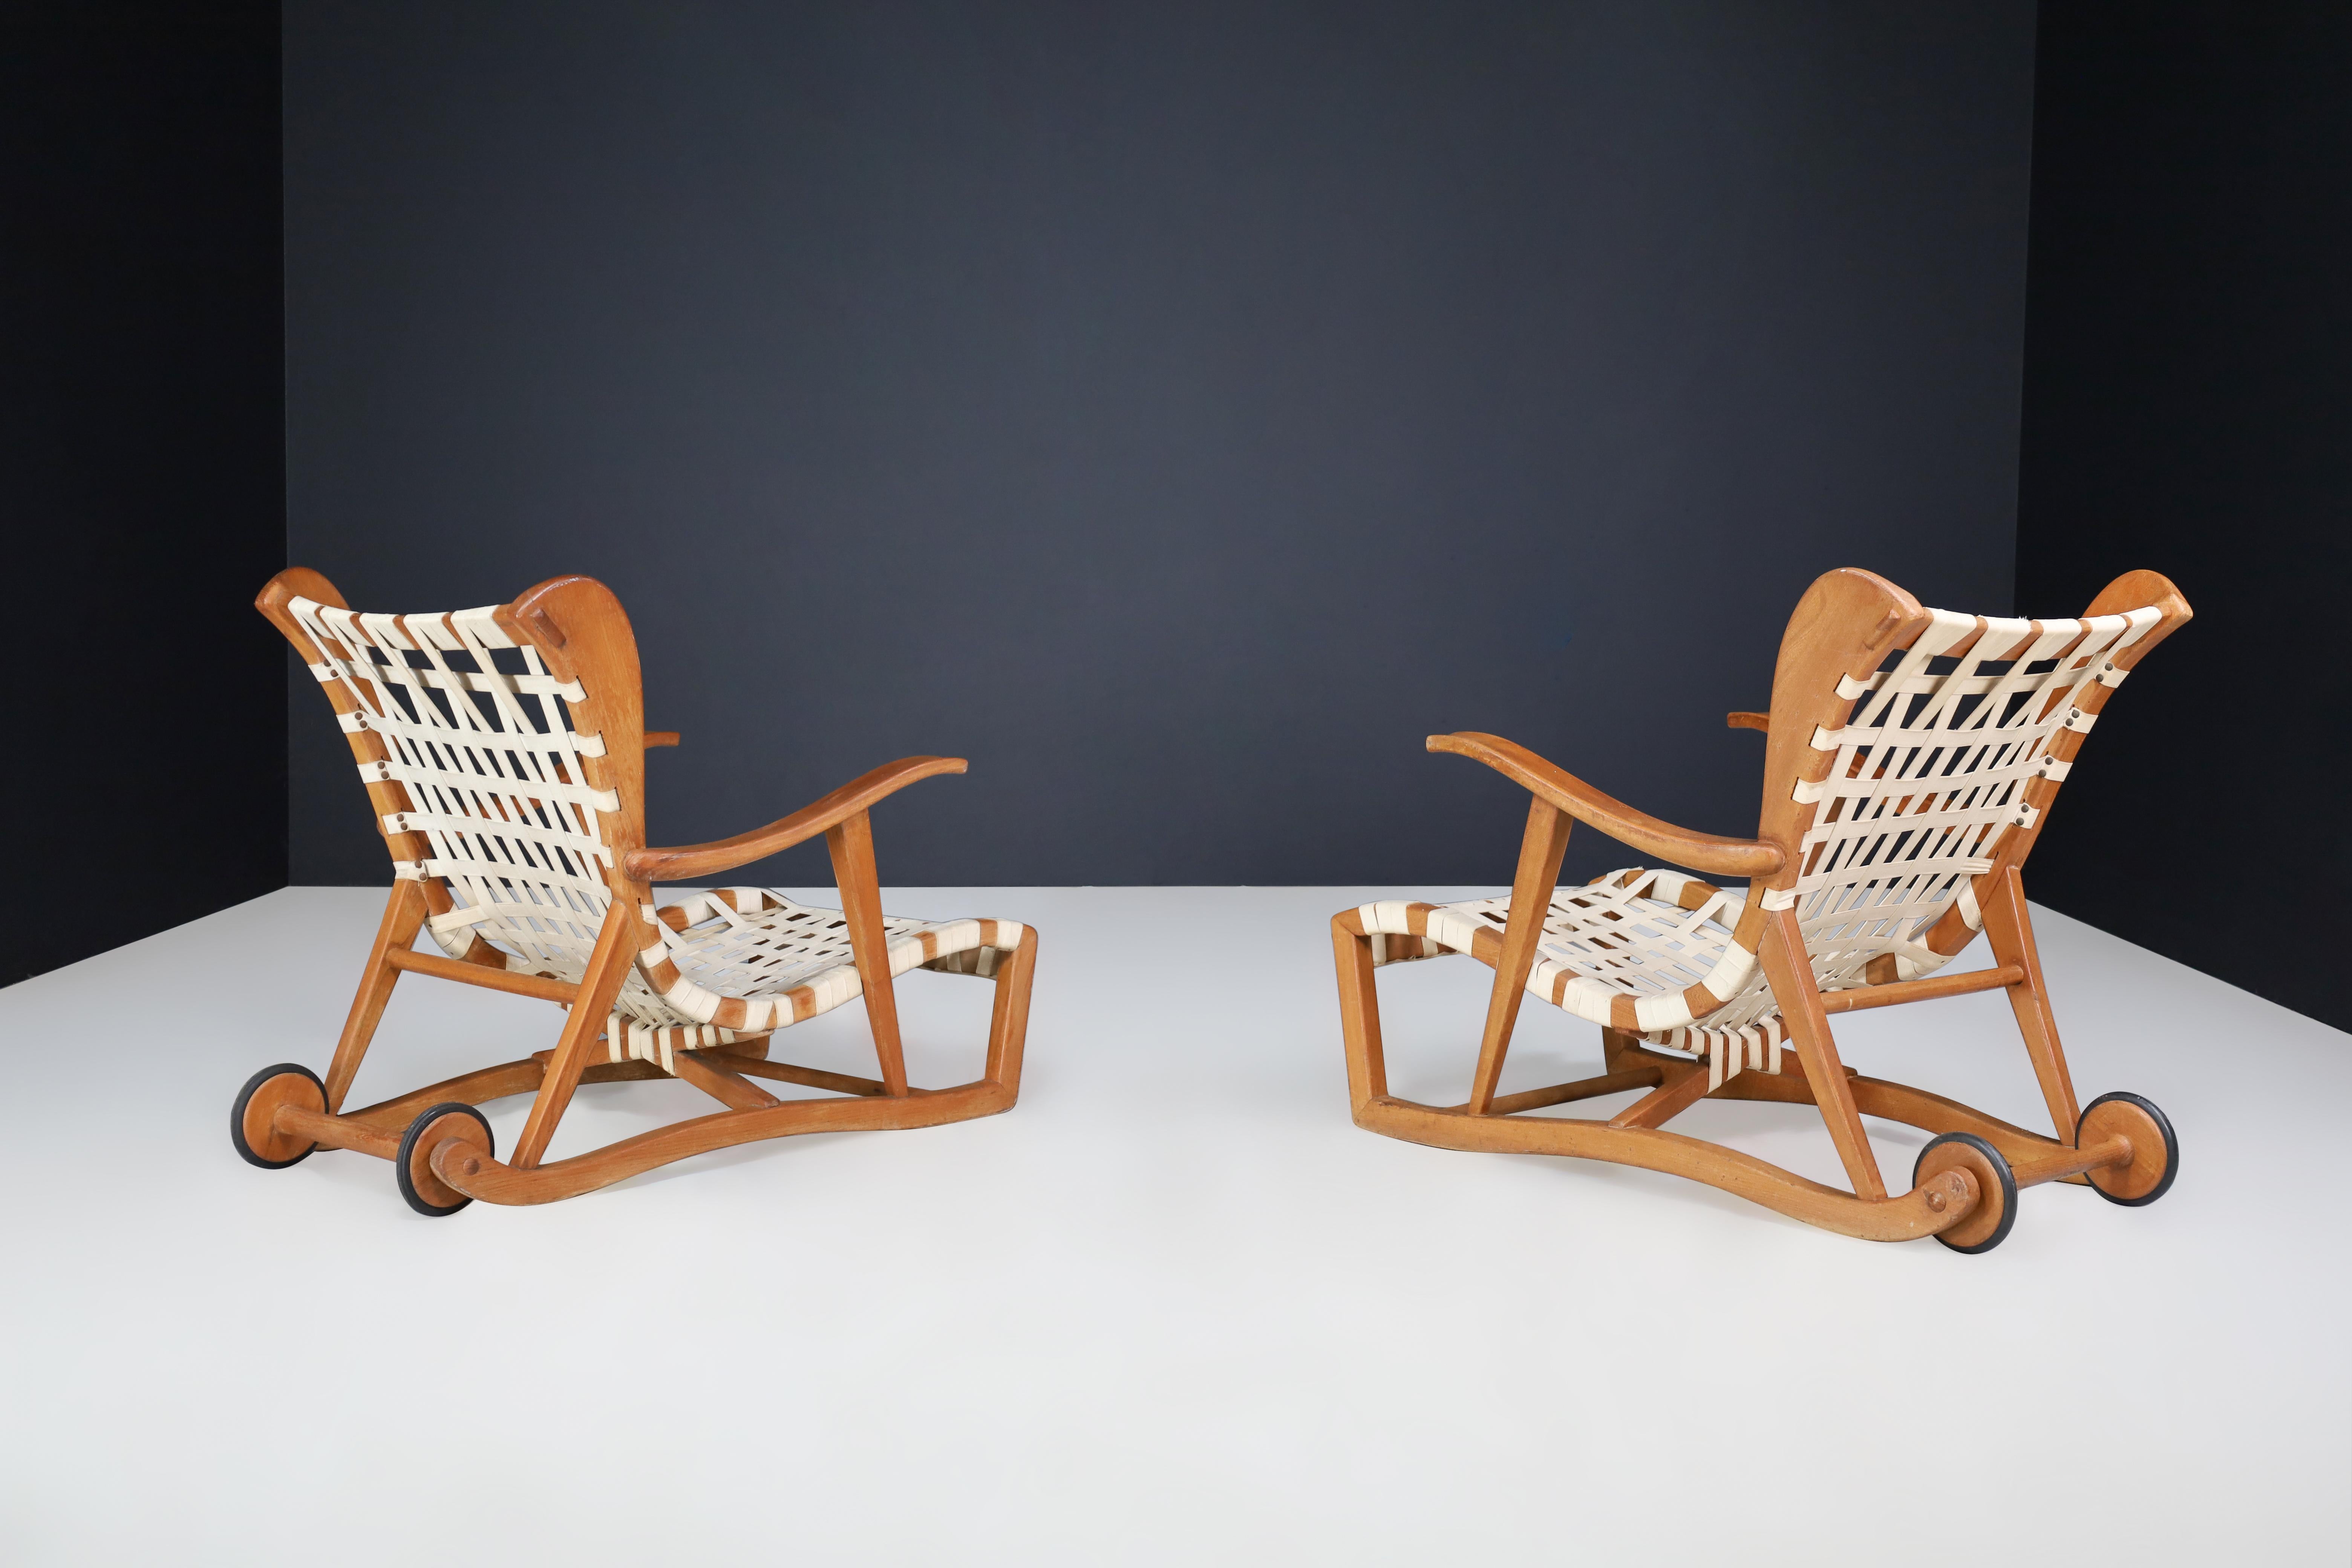 Sculptural oak Lounge chairs by Guglielmo Pecorini, Italy, the 1950s   For Sale 1